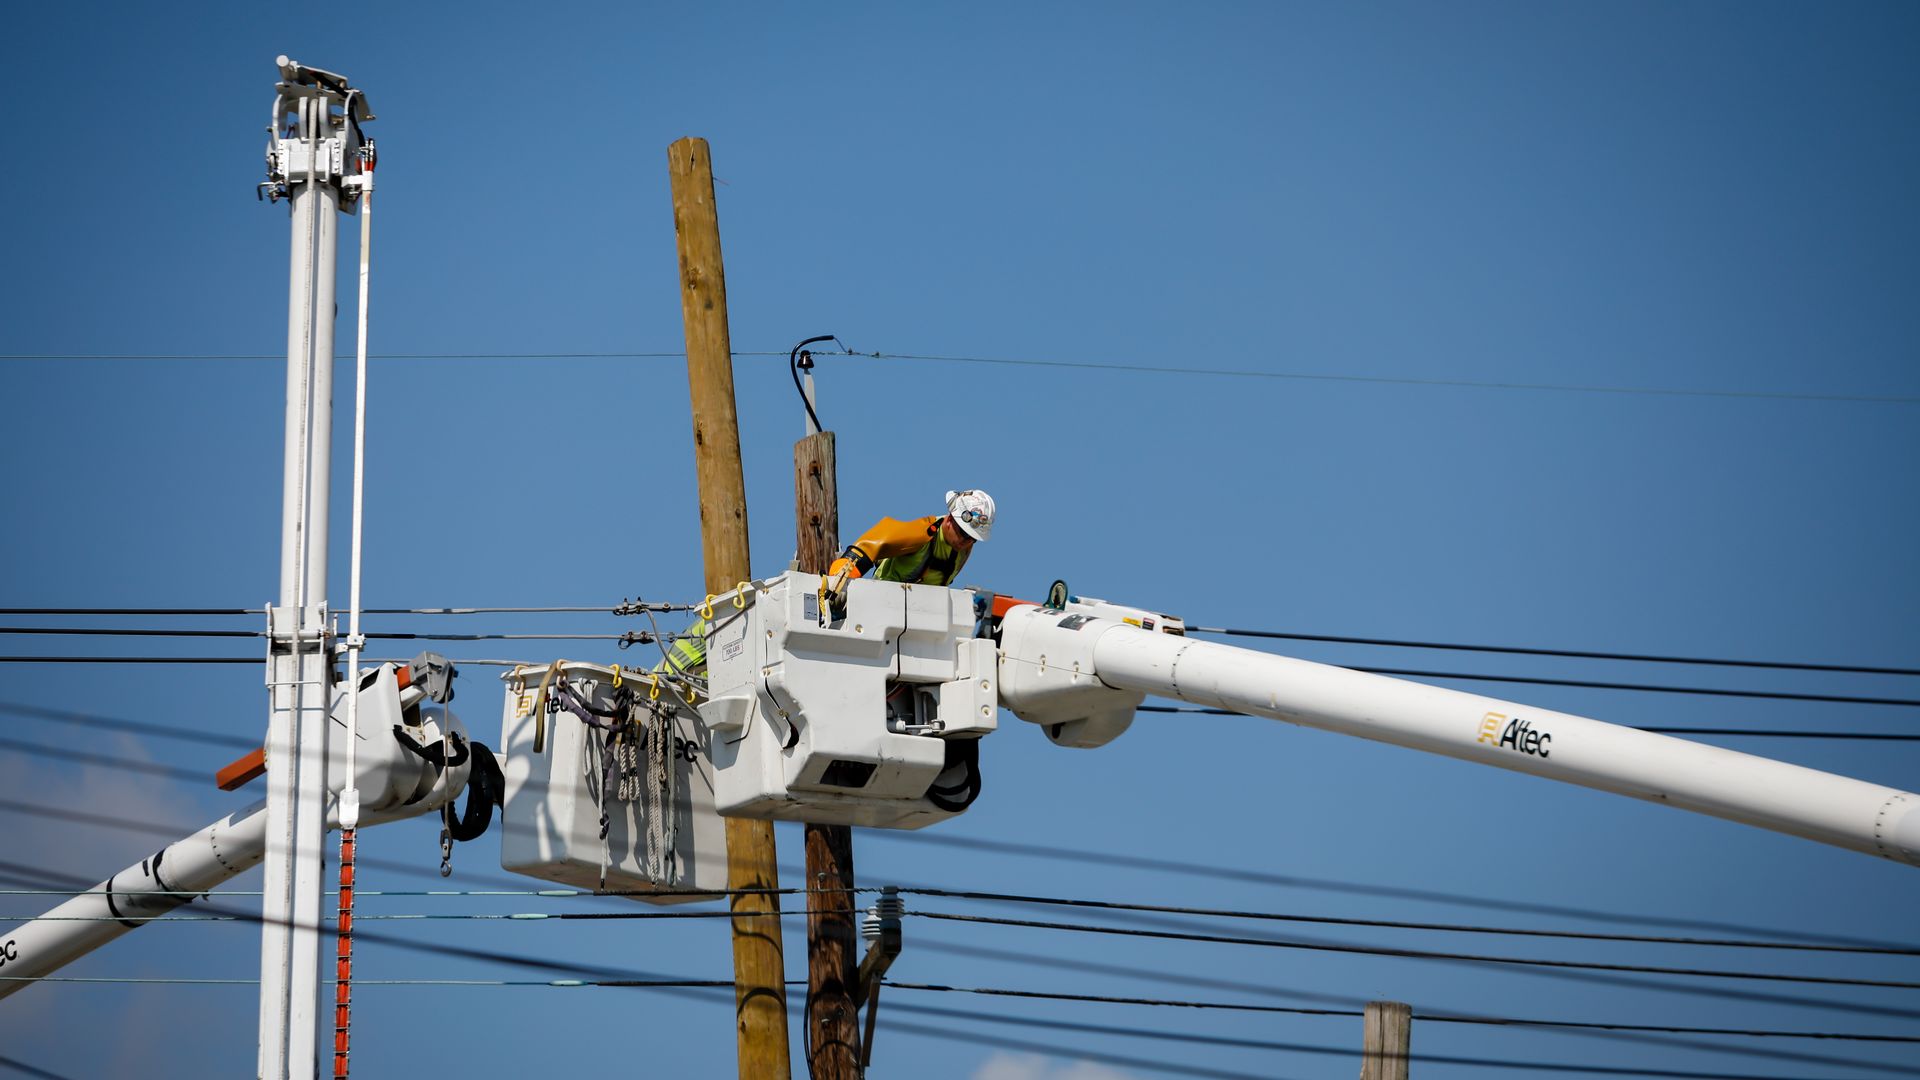 A worker repairs a utility poles during a power outage after Hurricane Ida in New Orleans, Louisiana, U.S., on Friday, Sept. 3, 2021